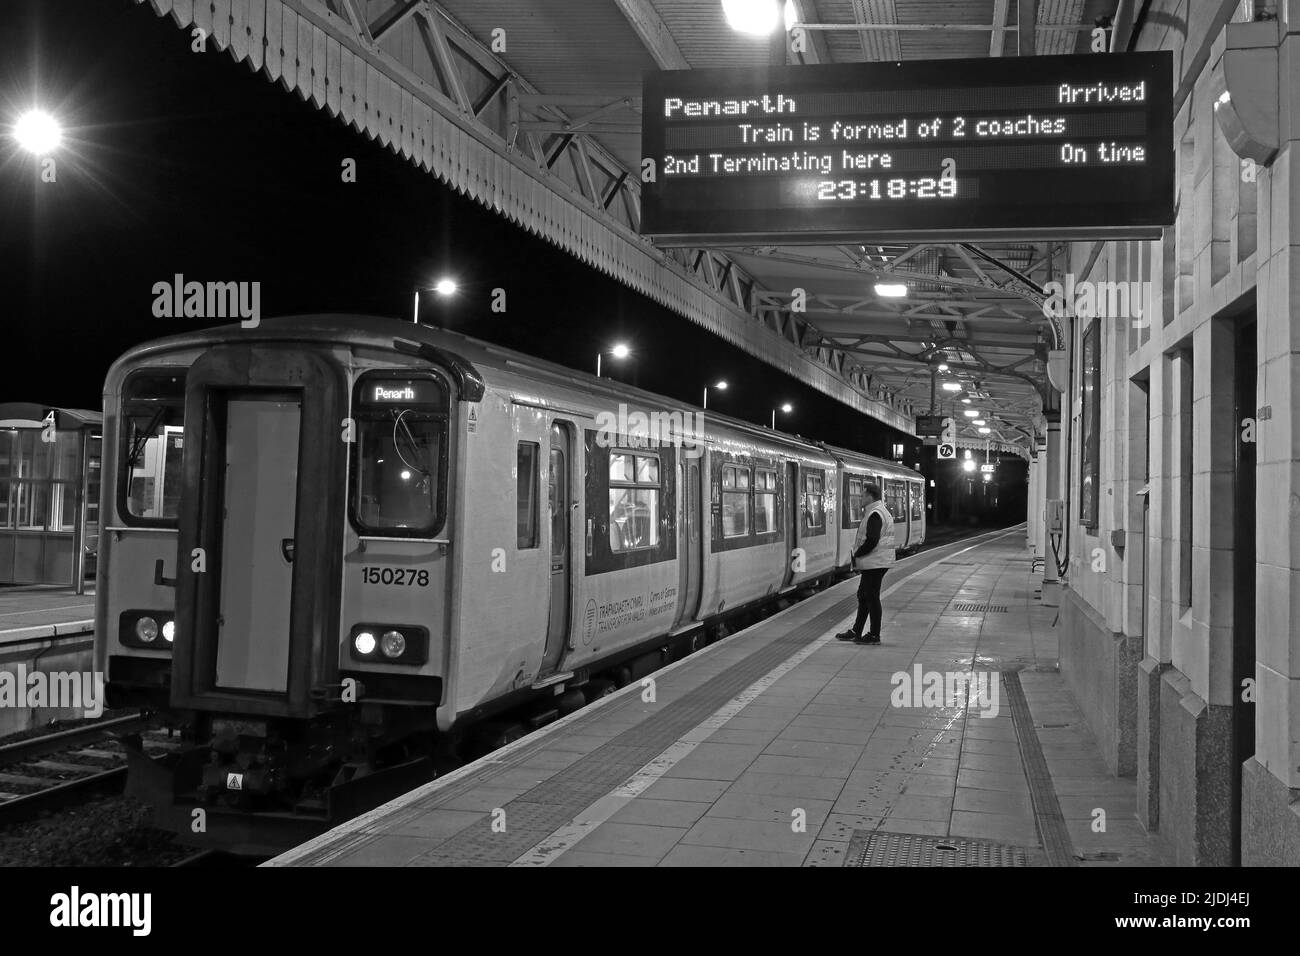 Cardiff Central platform 6b, last night TfW train, to Barry Island, Cardiff Central, Central Square, Cardiff, Wales, UK, CF10 1EP Stock Photo